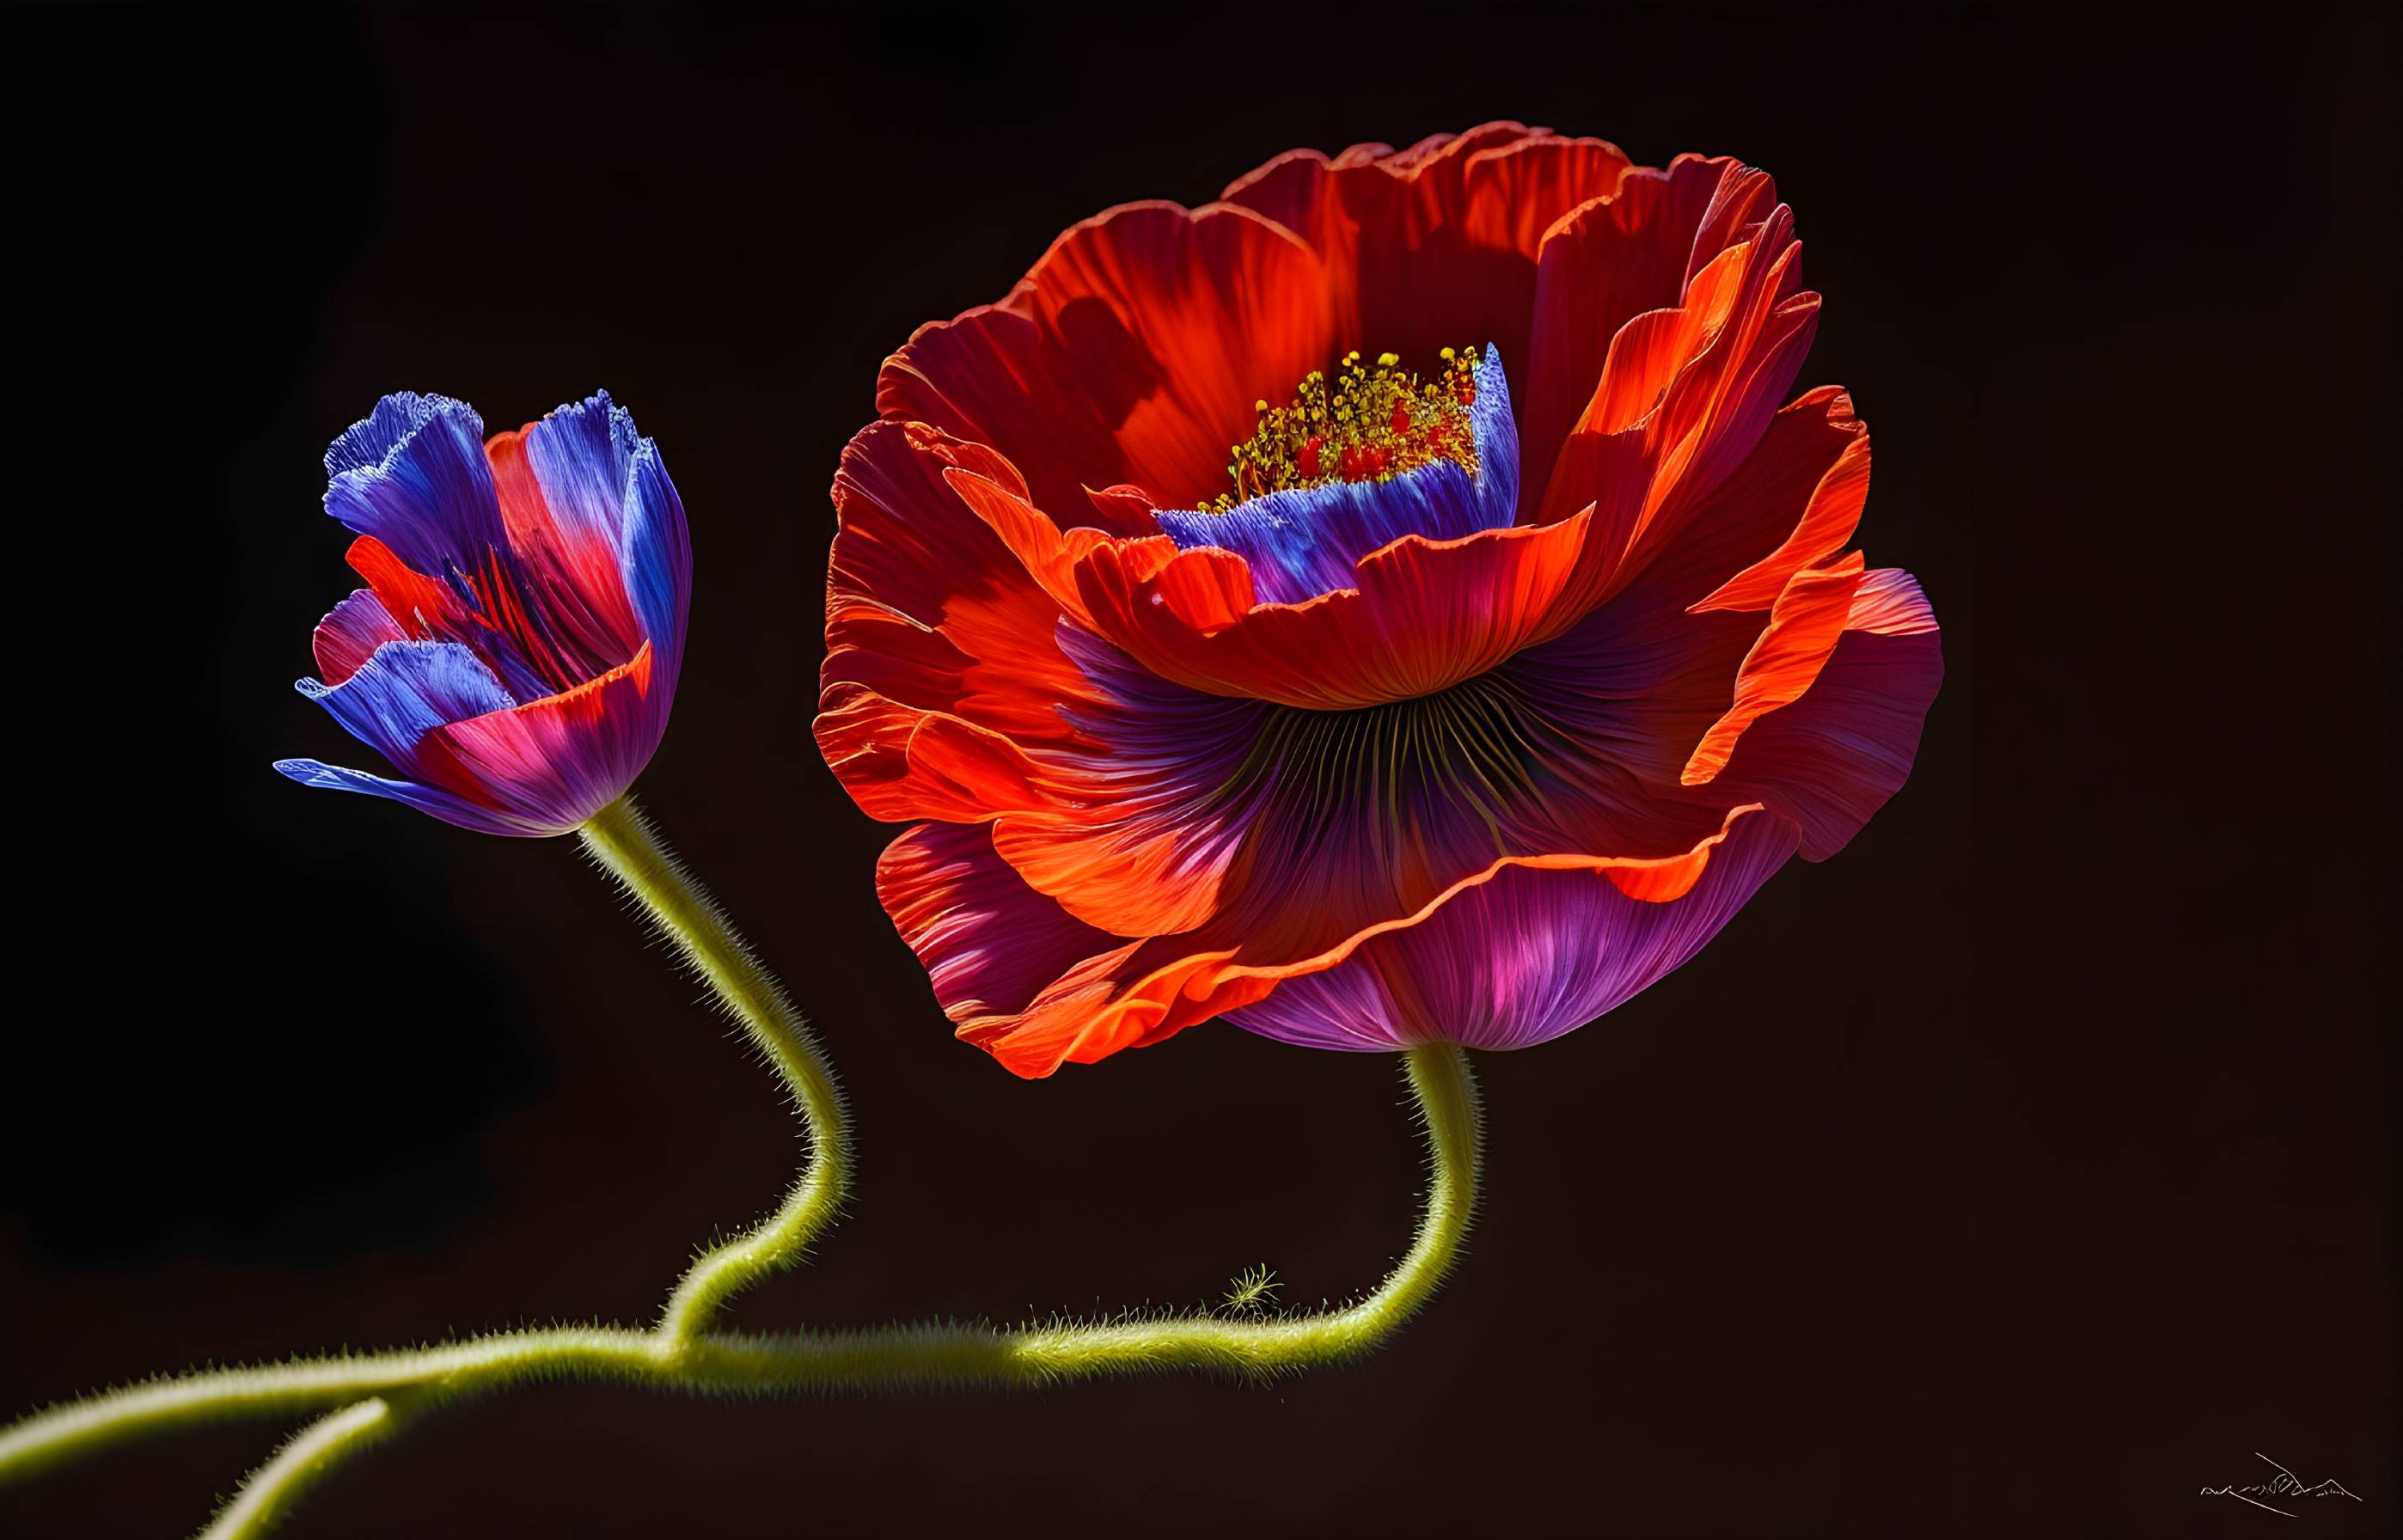 Vibrant poppies: one fully bloomed, one partially open, rich red and blue petals